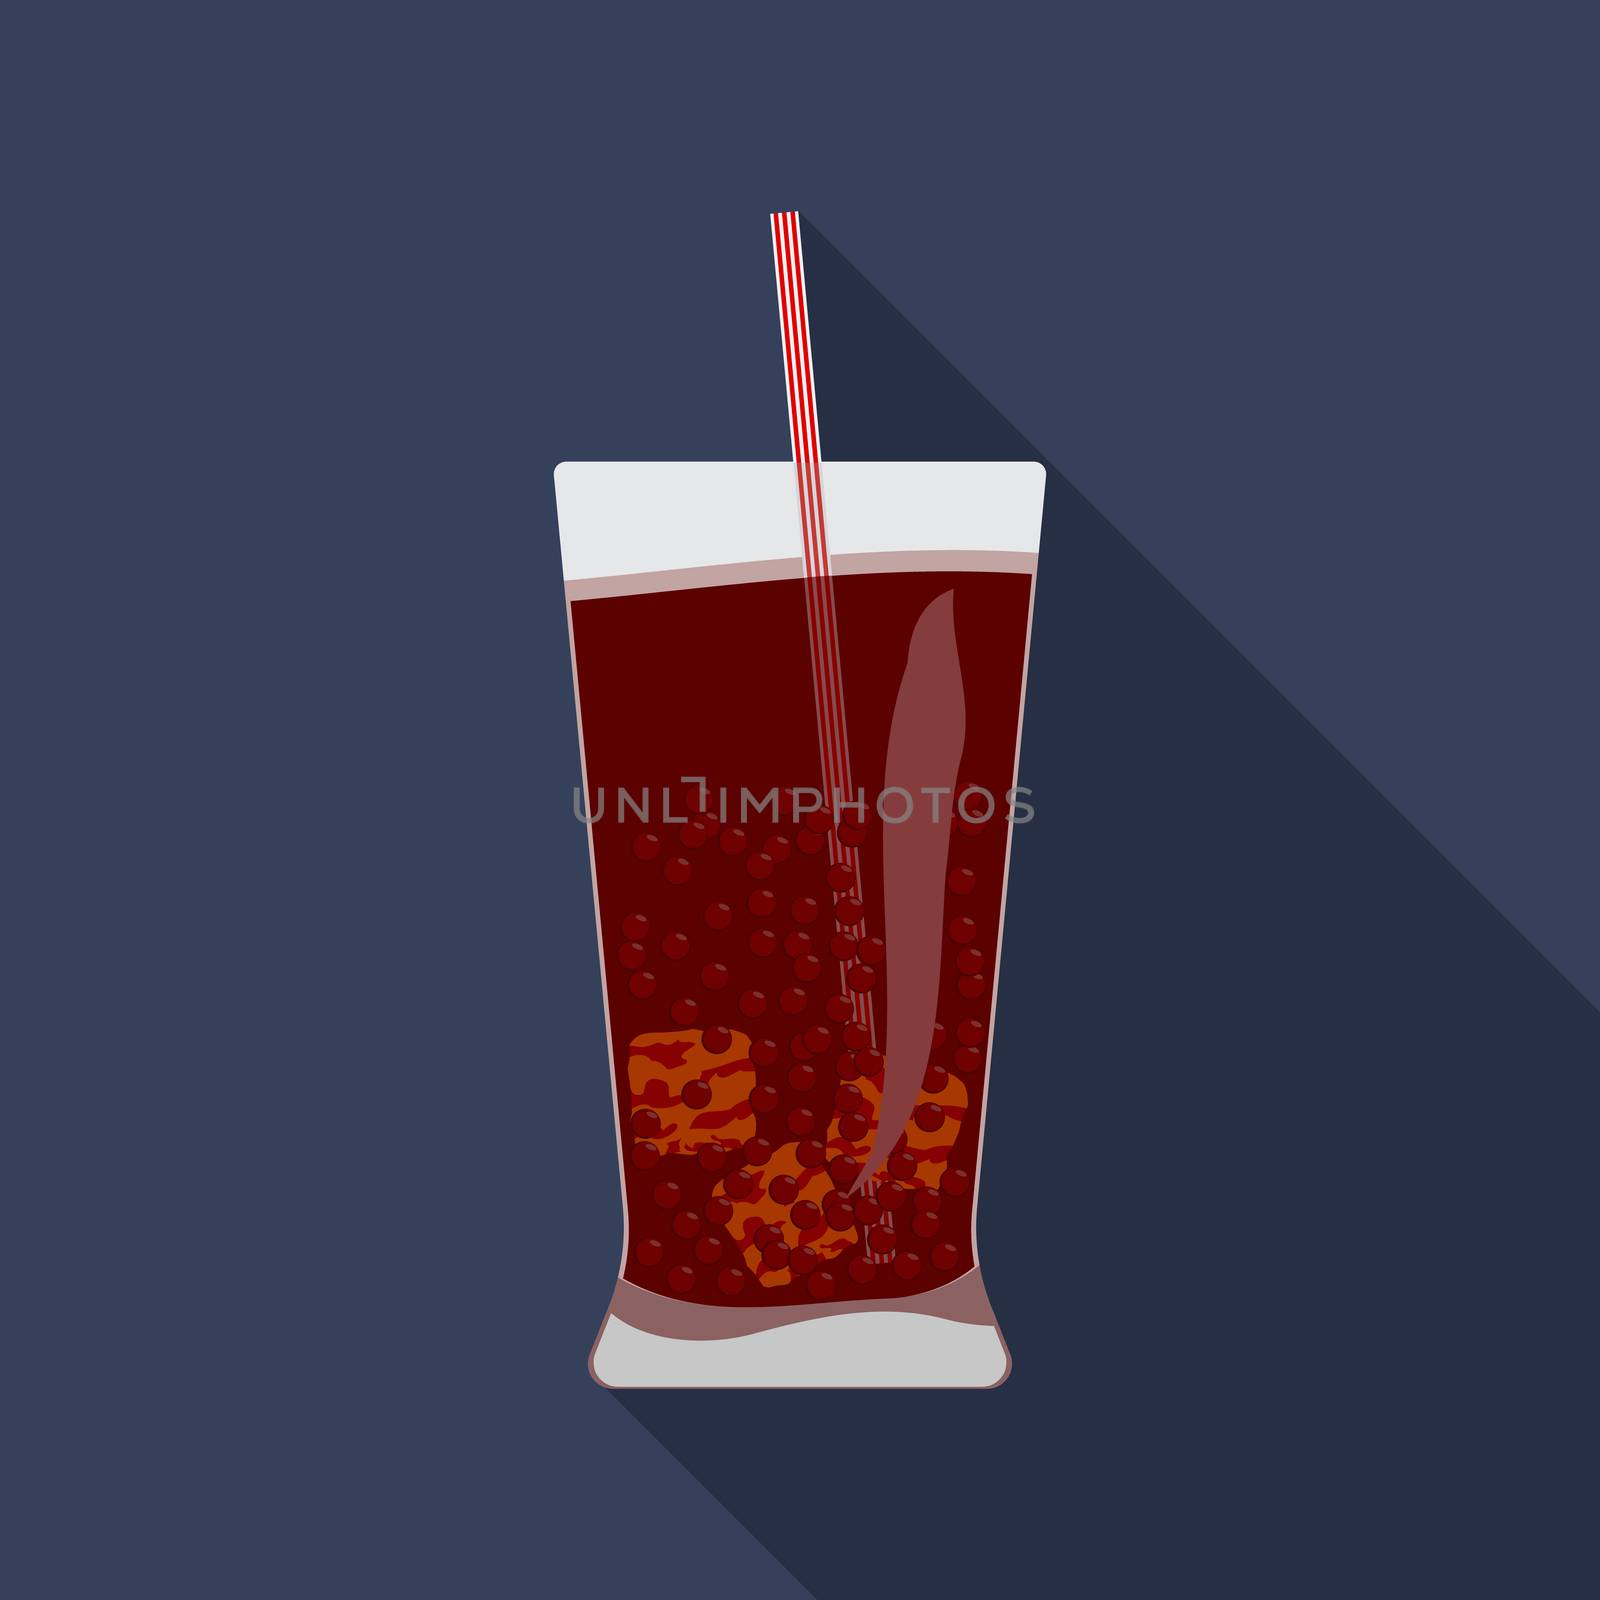 Flat design modern vector illustration of cold drink icon with long shadow by Lemon_workshop